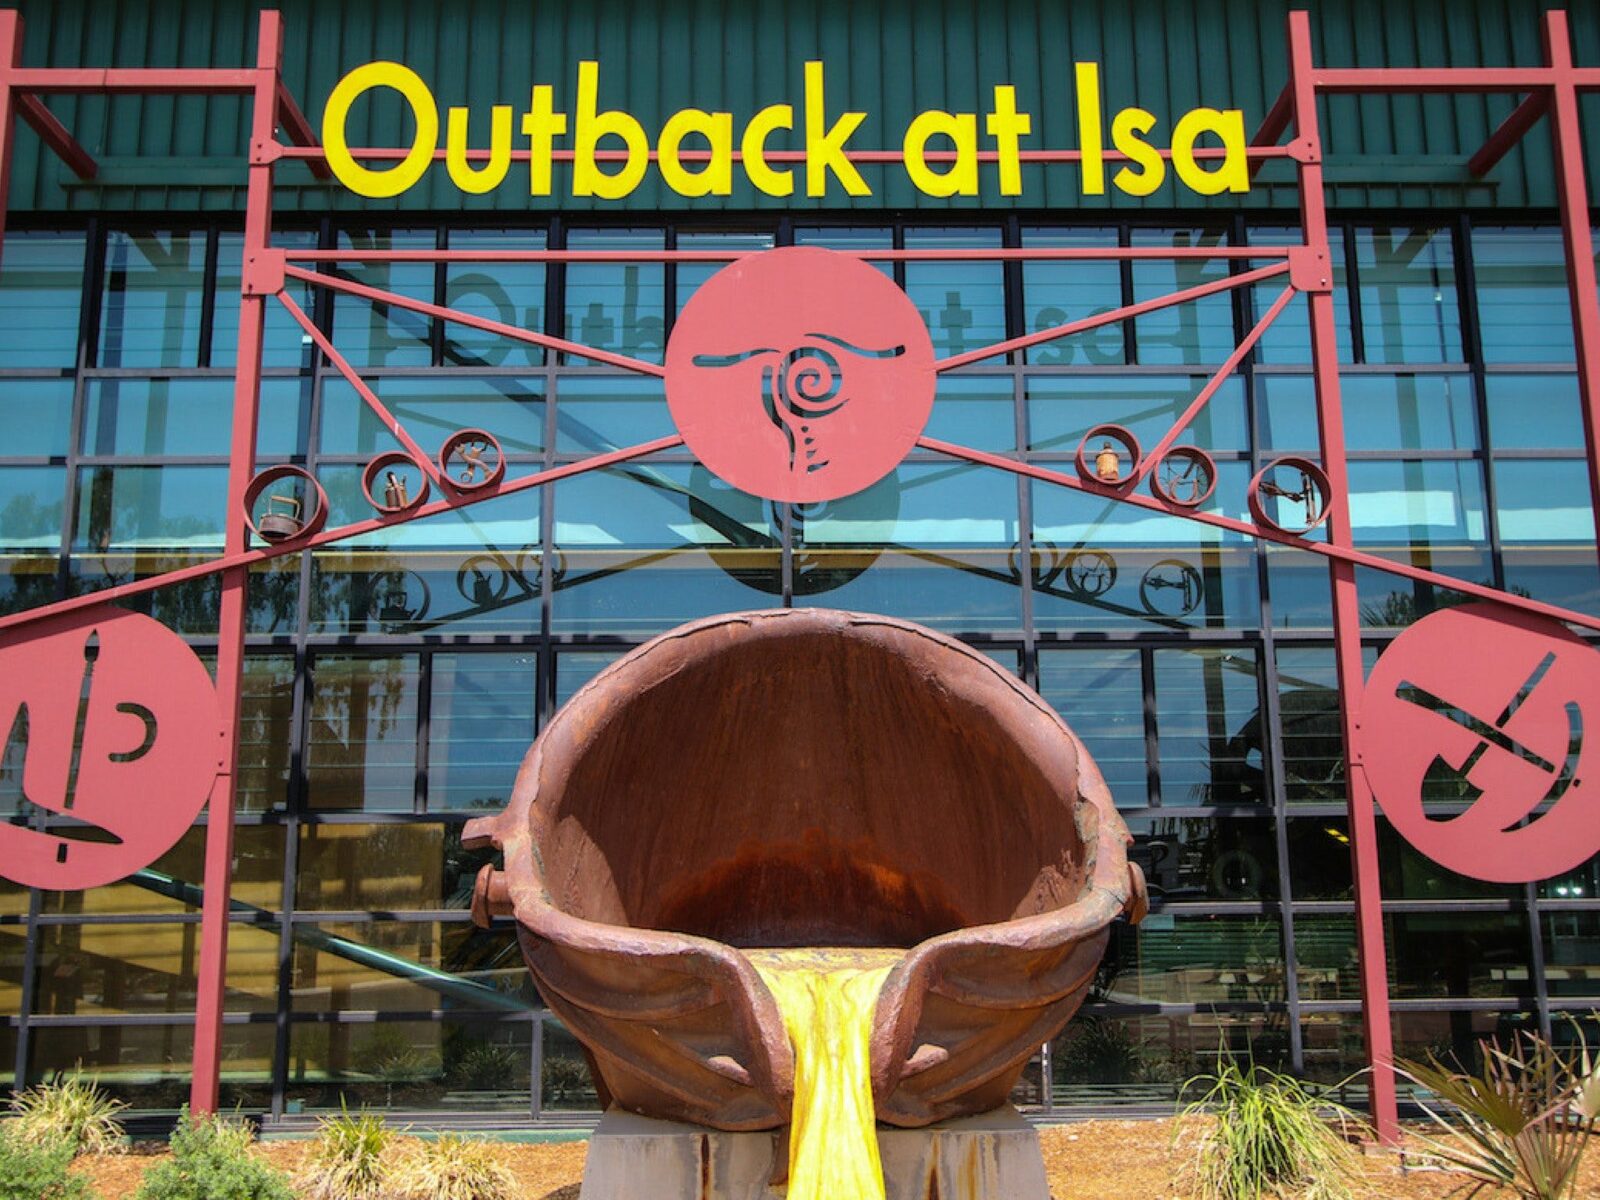 Outback at Isa Visitor Information Centre